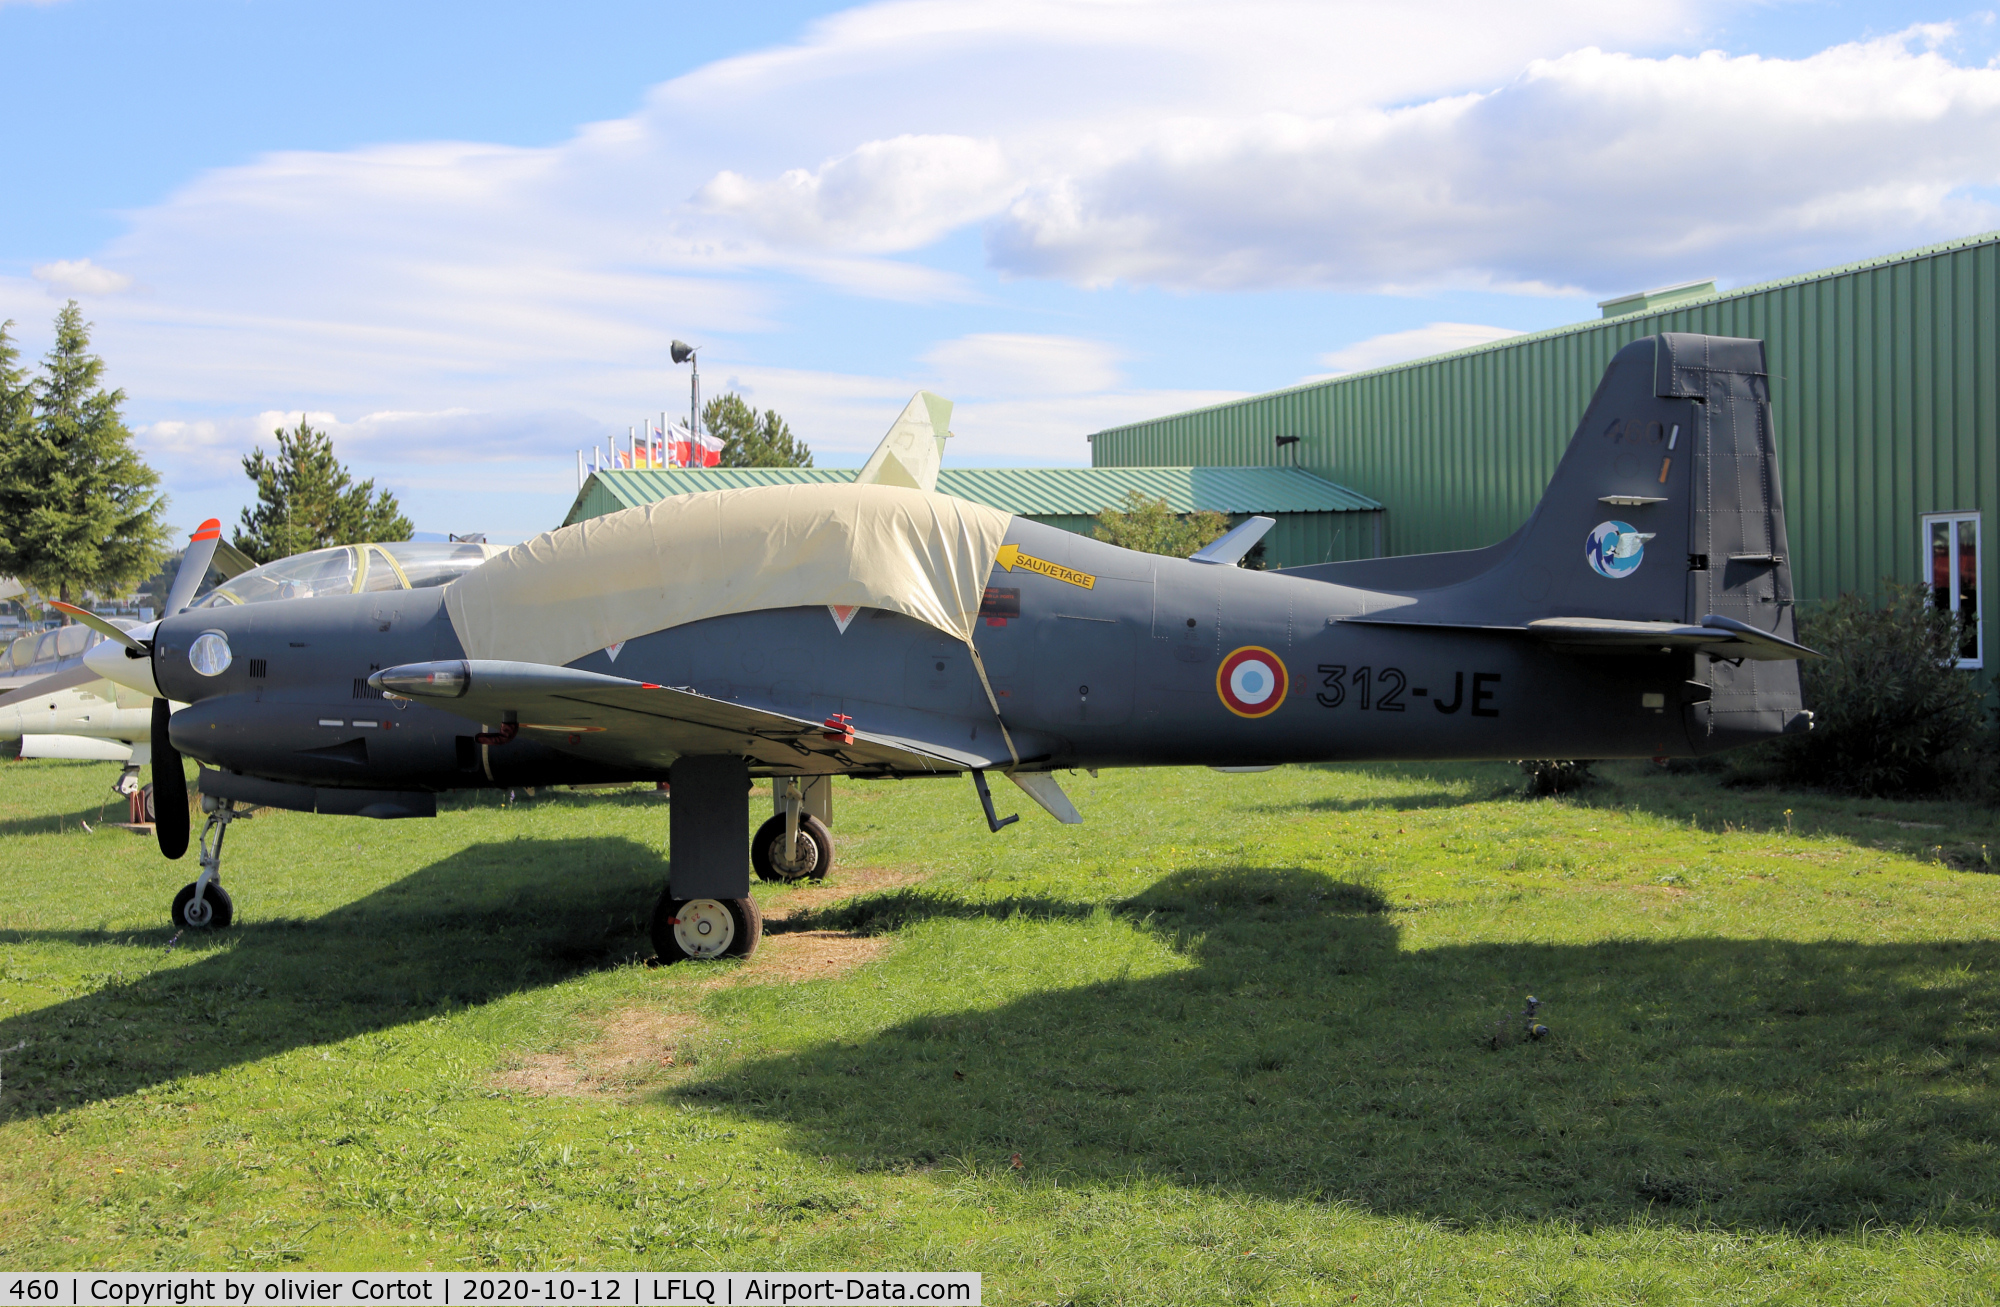 460, Embraer EMB-312F Tucano C/N 312460, now on display at the Montelimar museum